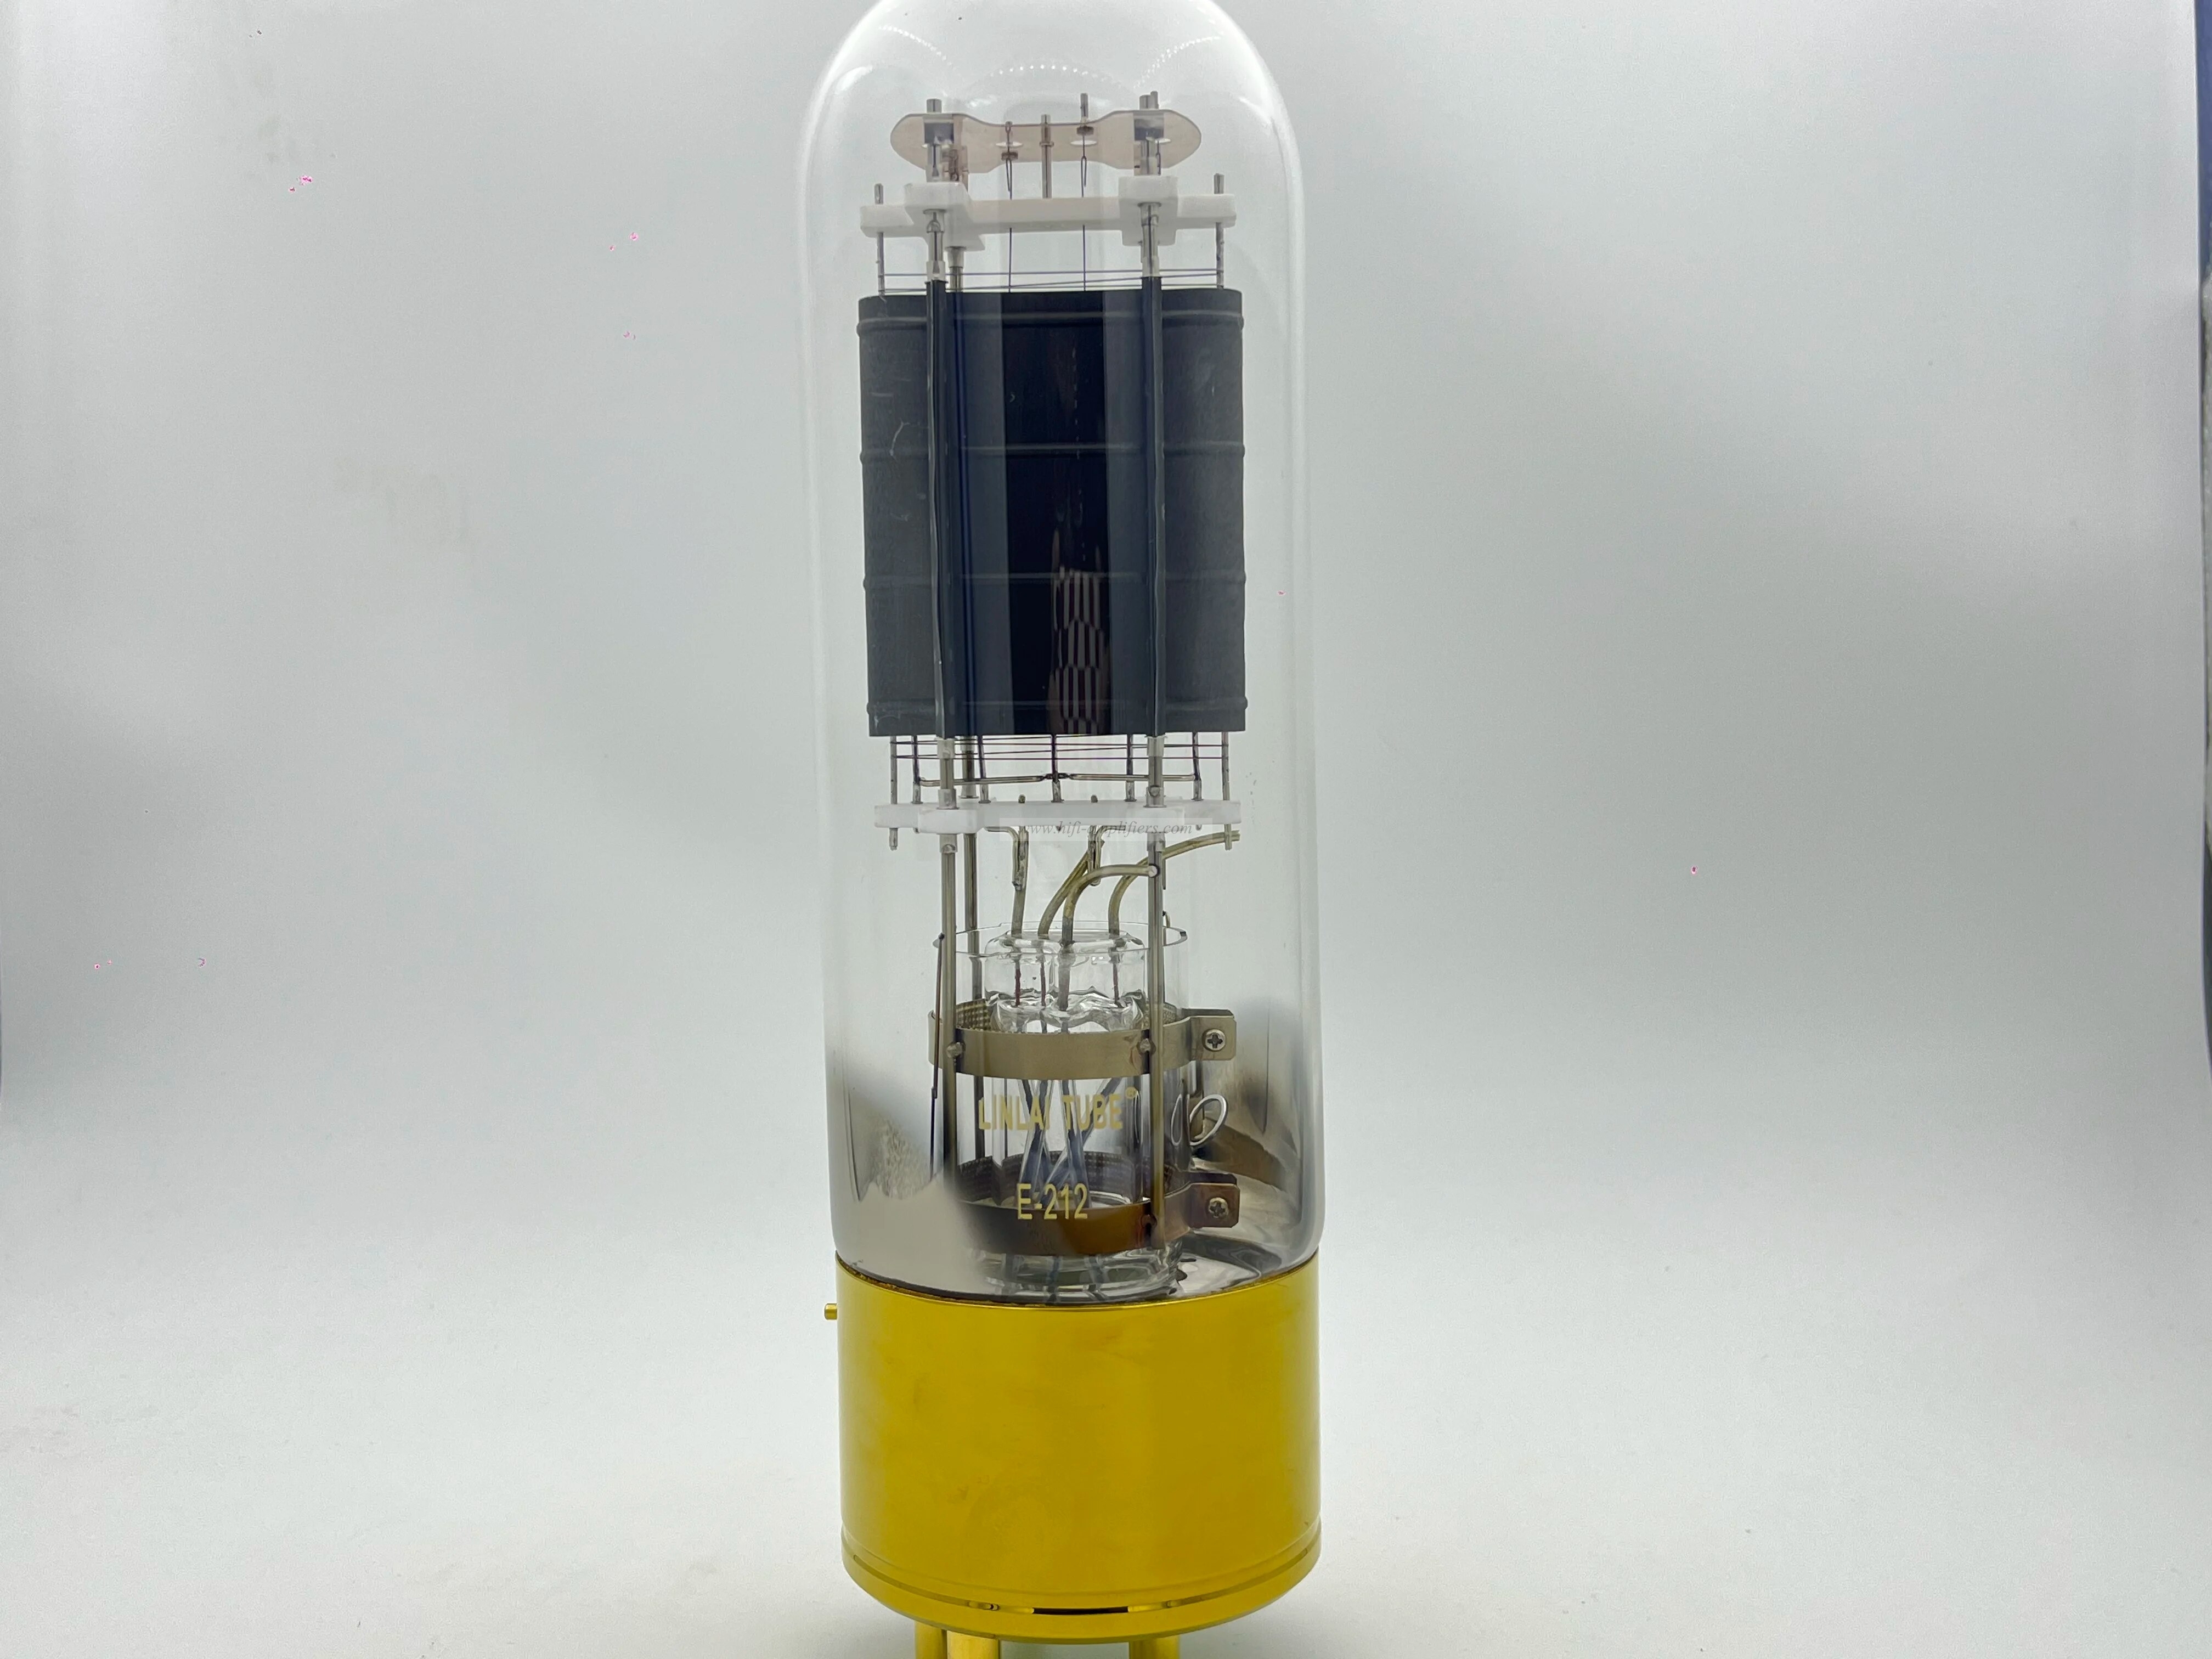 LINLAI E-212 Vacuum Tube 1:1 replica Western Electric 212E Electronic Tube Matched Pair